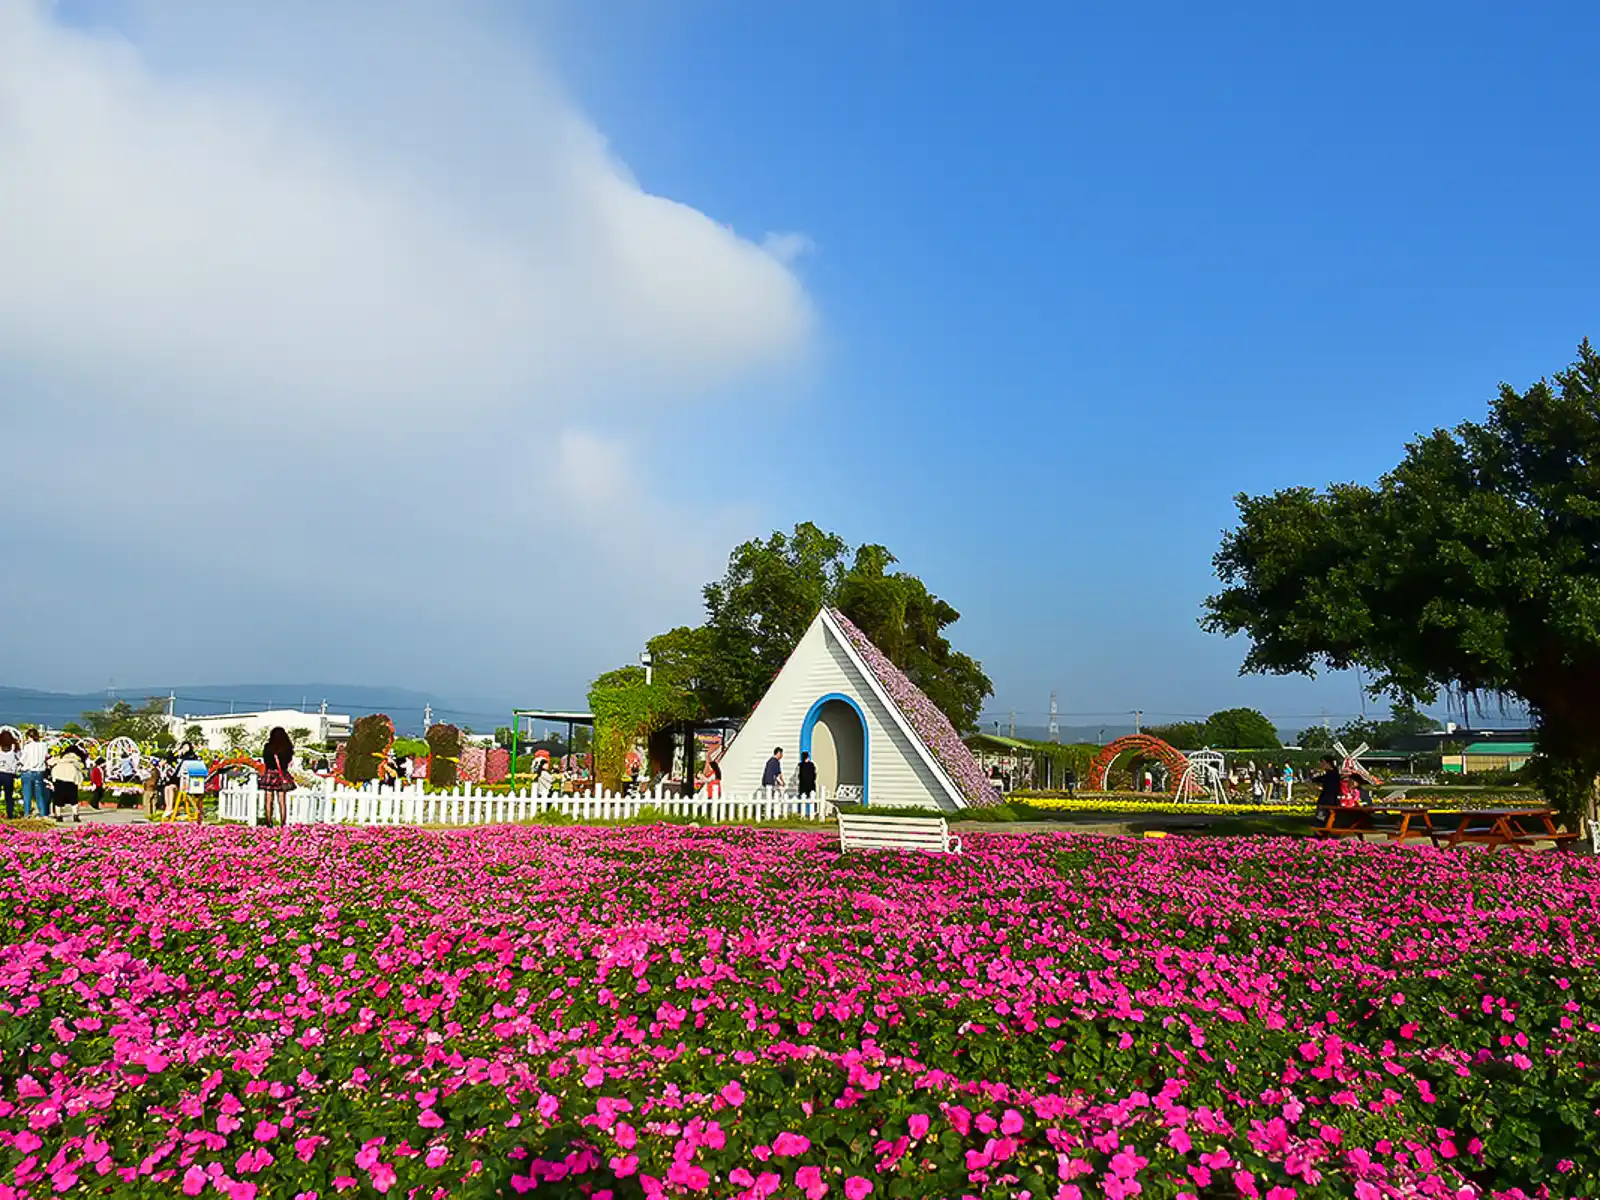 Farm decorations and fields of flowers intertwine at Chungshe Flower Garden.